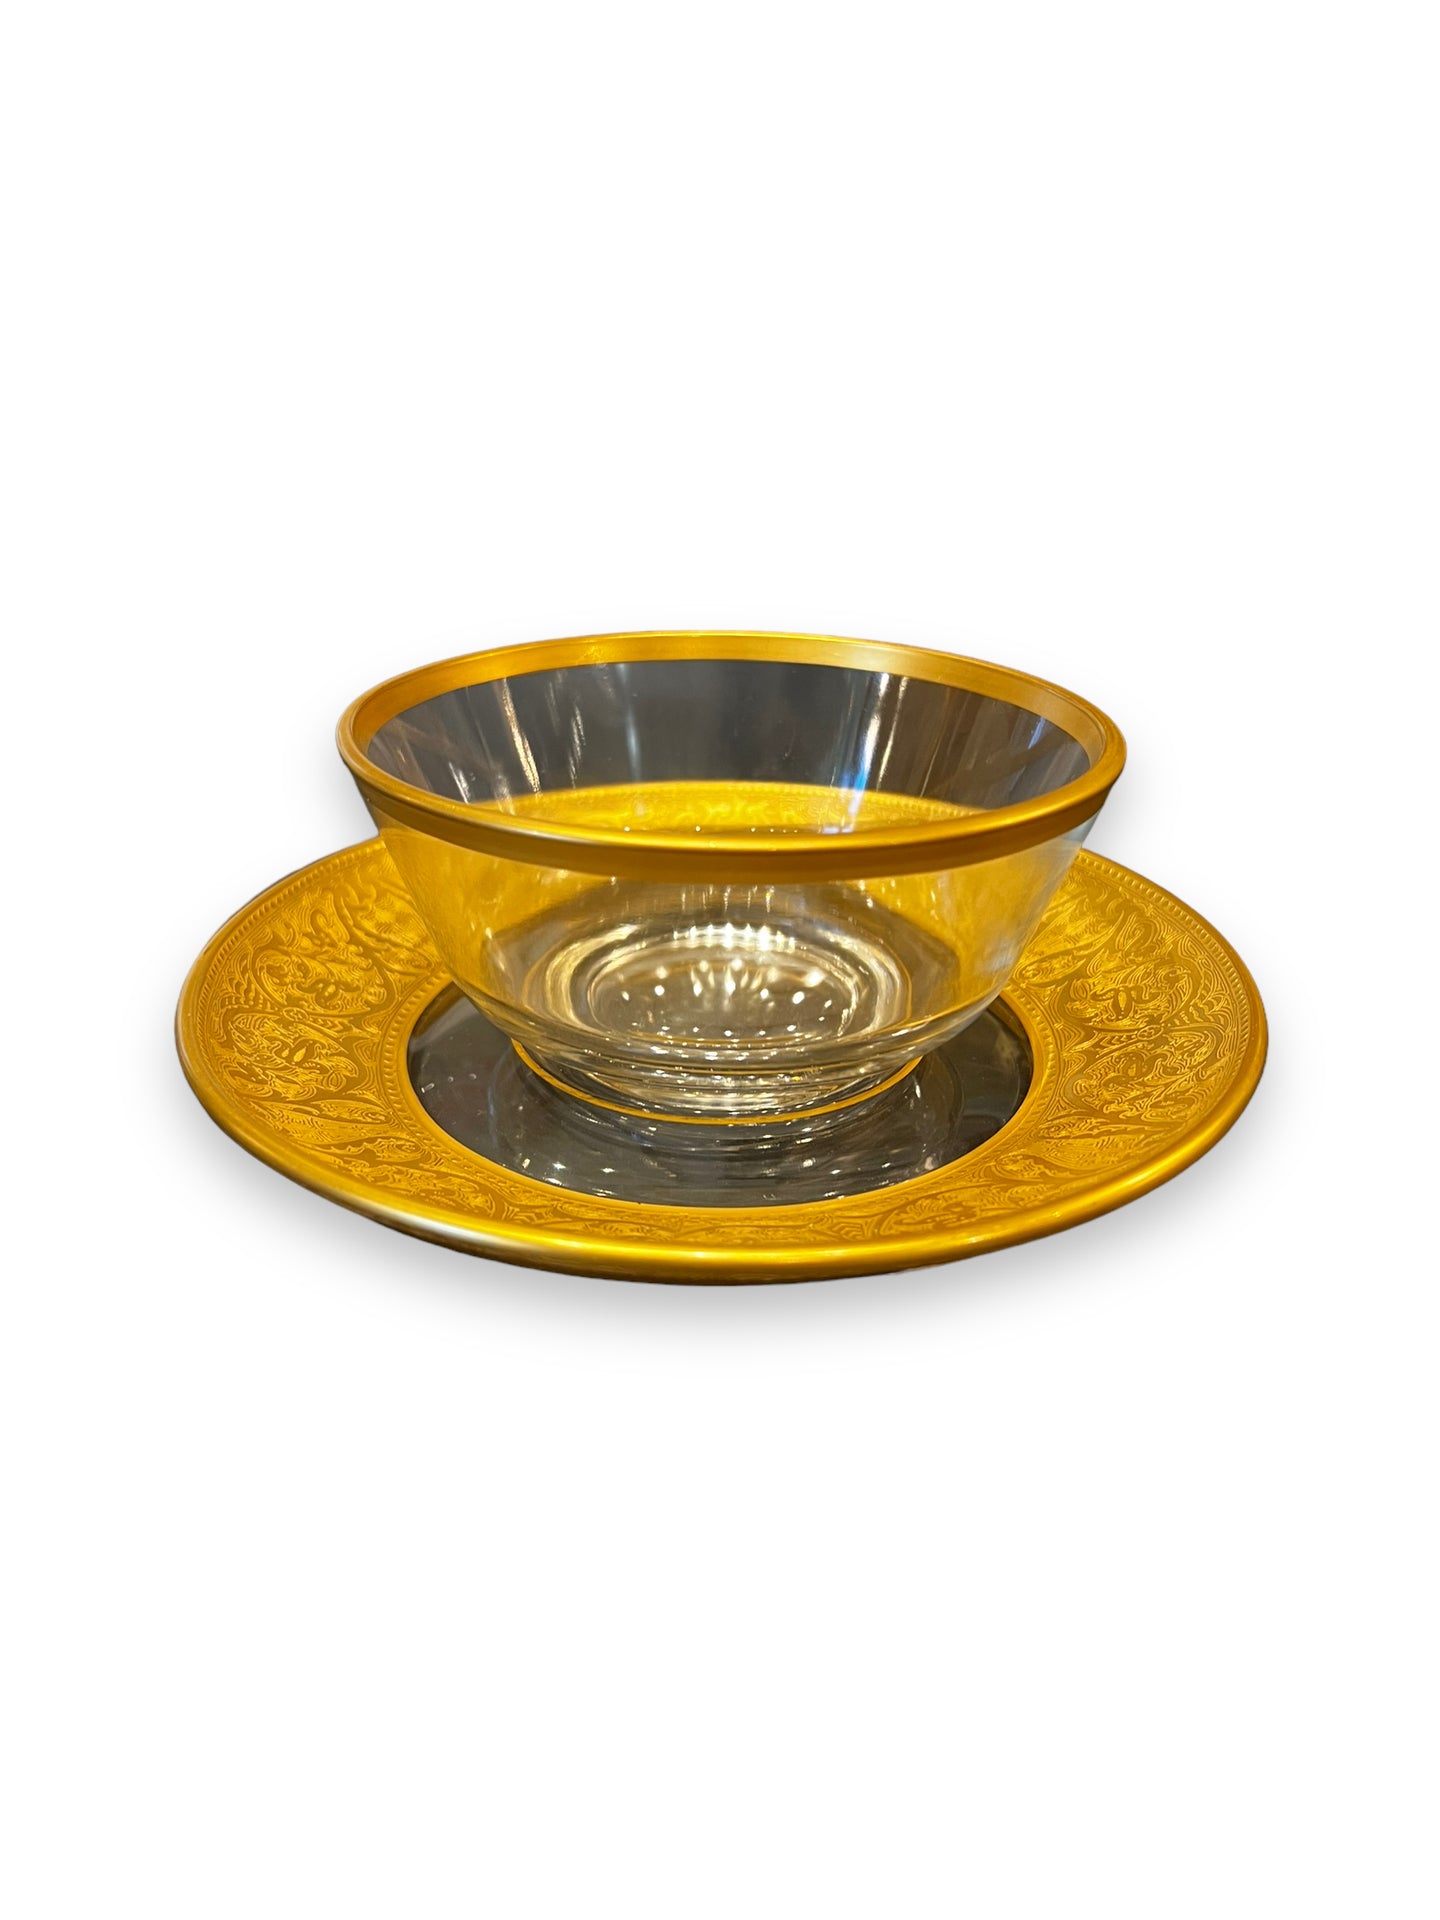 2 PS Set- 24K Gold Rim Snack Plate with Gold rim Snack Bowl - DeFrenS